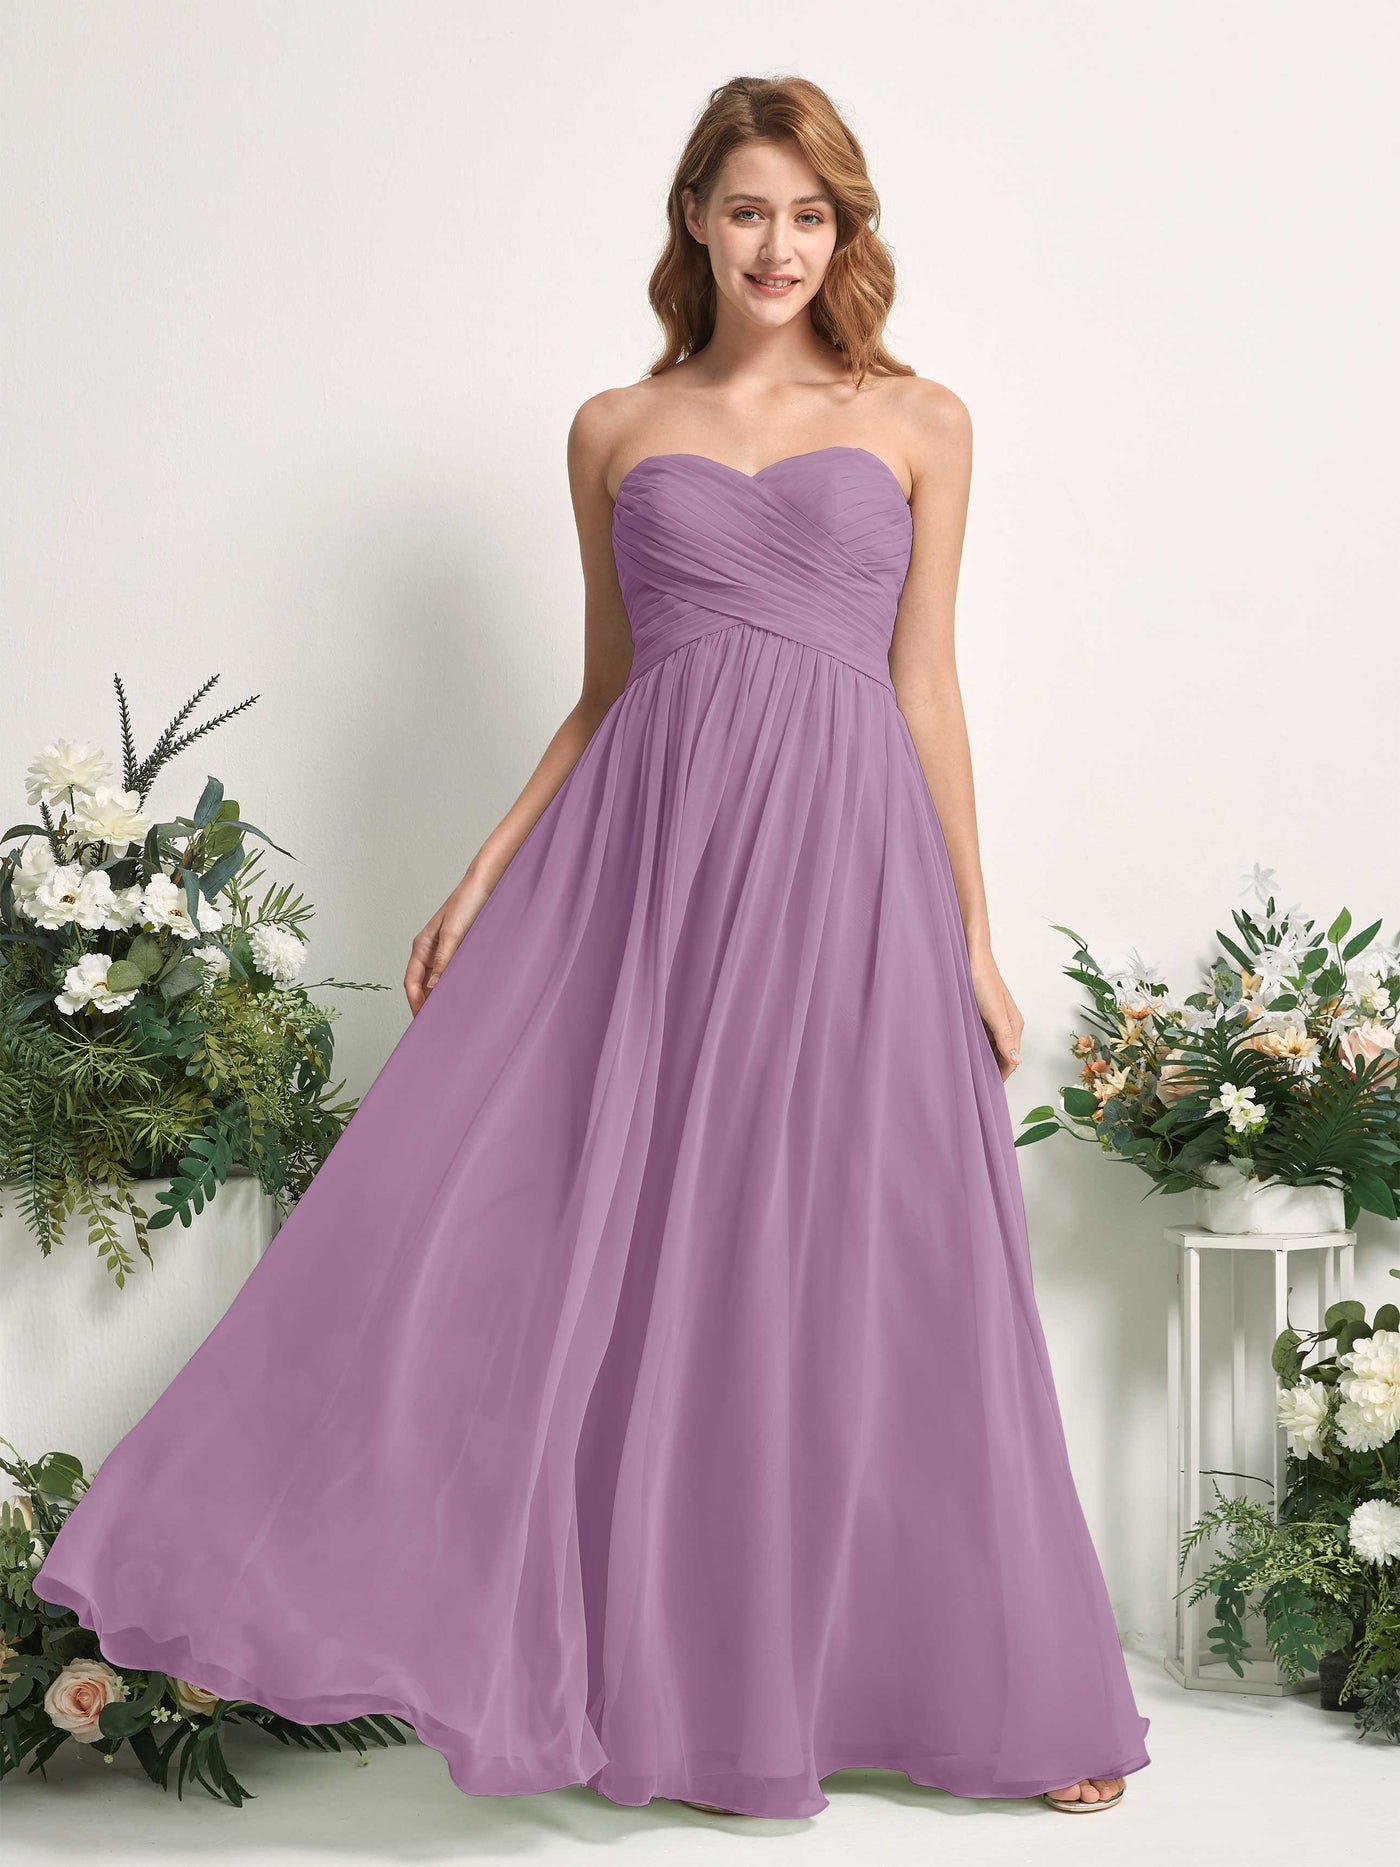 Bridesmaid Dress A-line Chiffon Sweetheart Full Length Sleeveless Wedding Party Dress - Orchid Mist (81226921)#color_orchid-mist